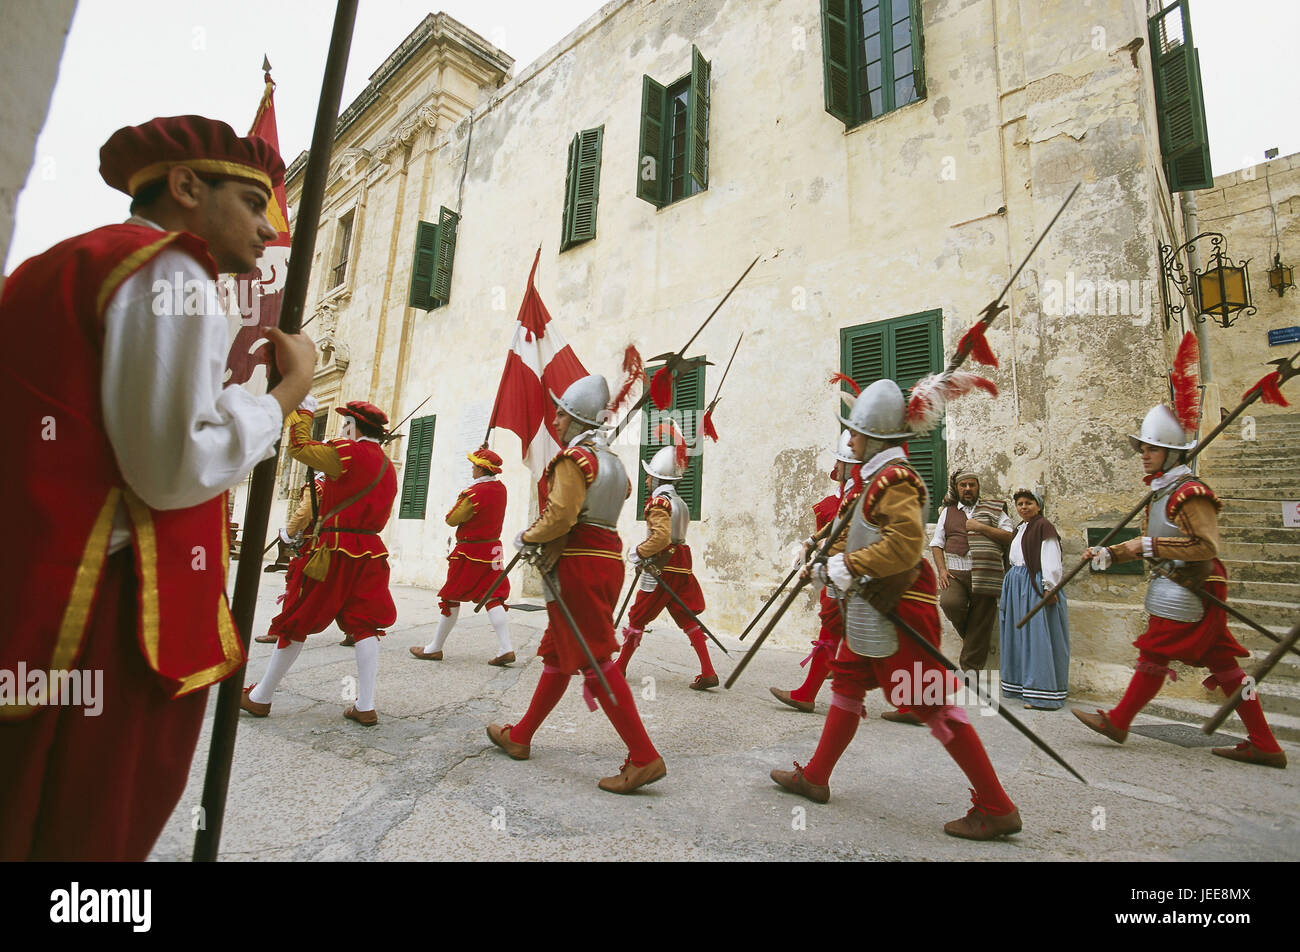 Island Malta, peninsula Sciberras, Valletta, fort piece Elmo, military save, guard, costumes, historically, no model release, Maltese islands, Mediterranean island, capital, culture, UNESCO-world cultural heritage, structure, fortress, bastion, showing, show, Guardia save, person, men, soldiers, halberds, tradition, tourism, place of interest, outside, Stock Photo